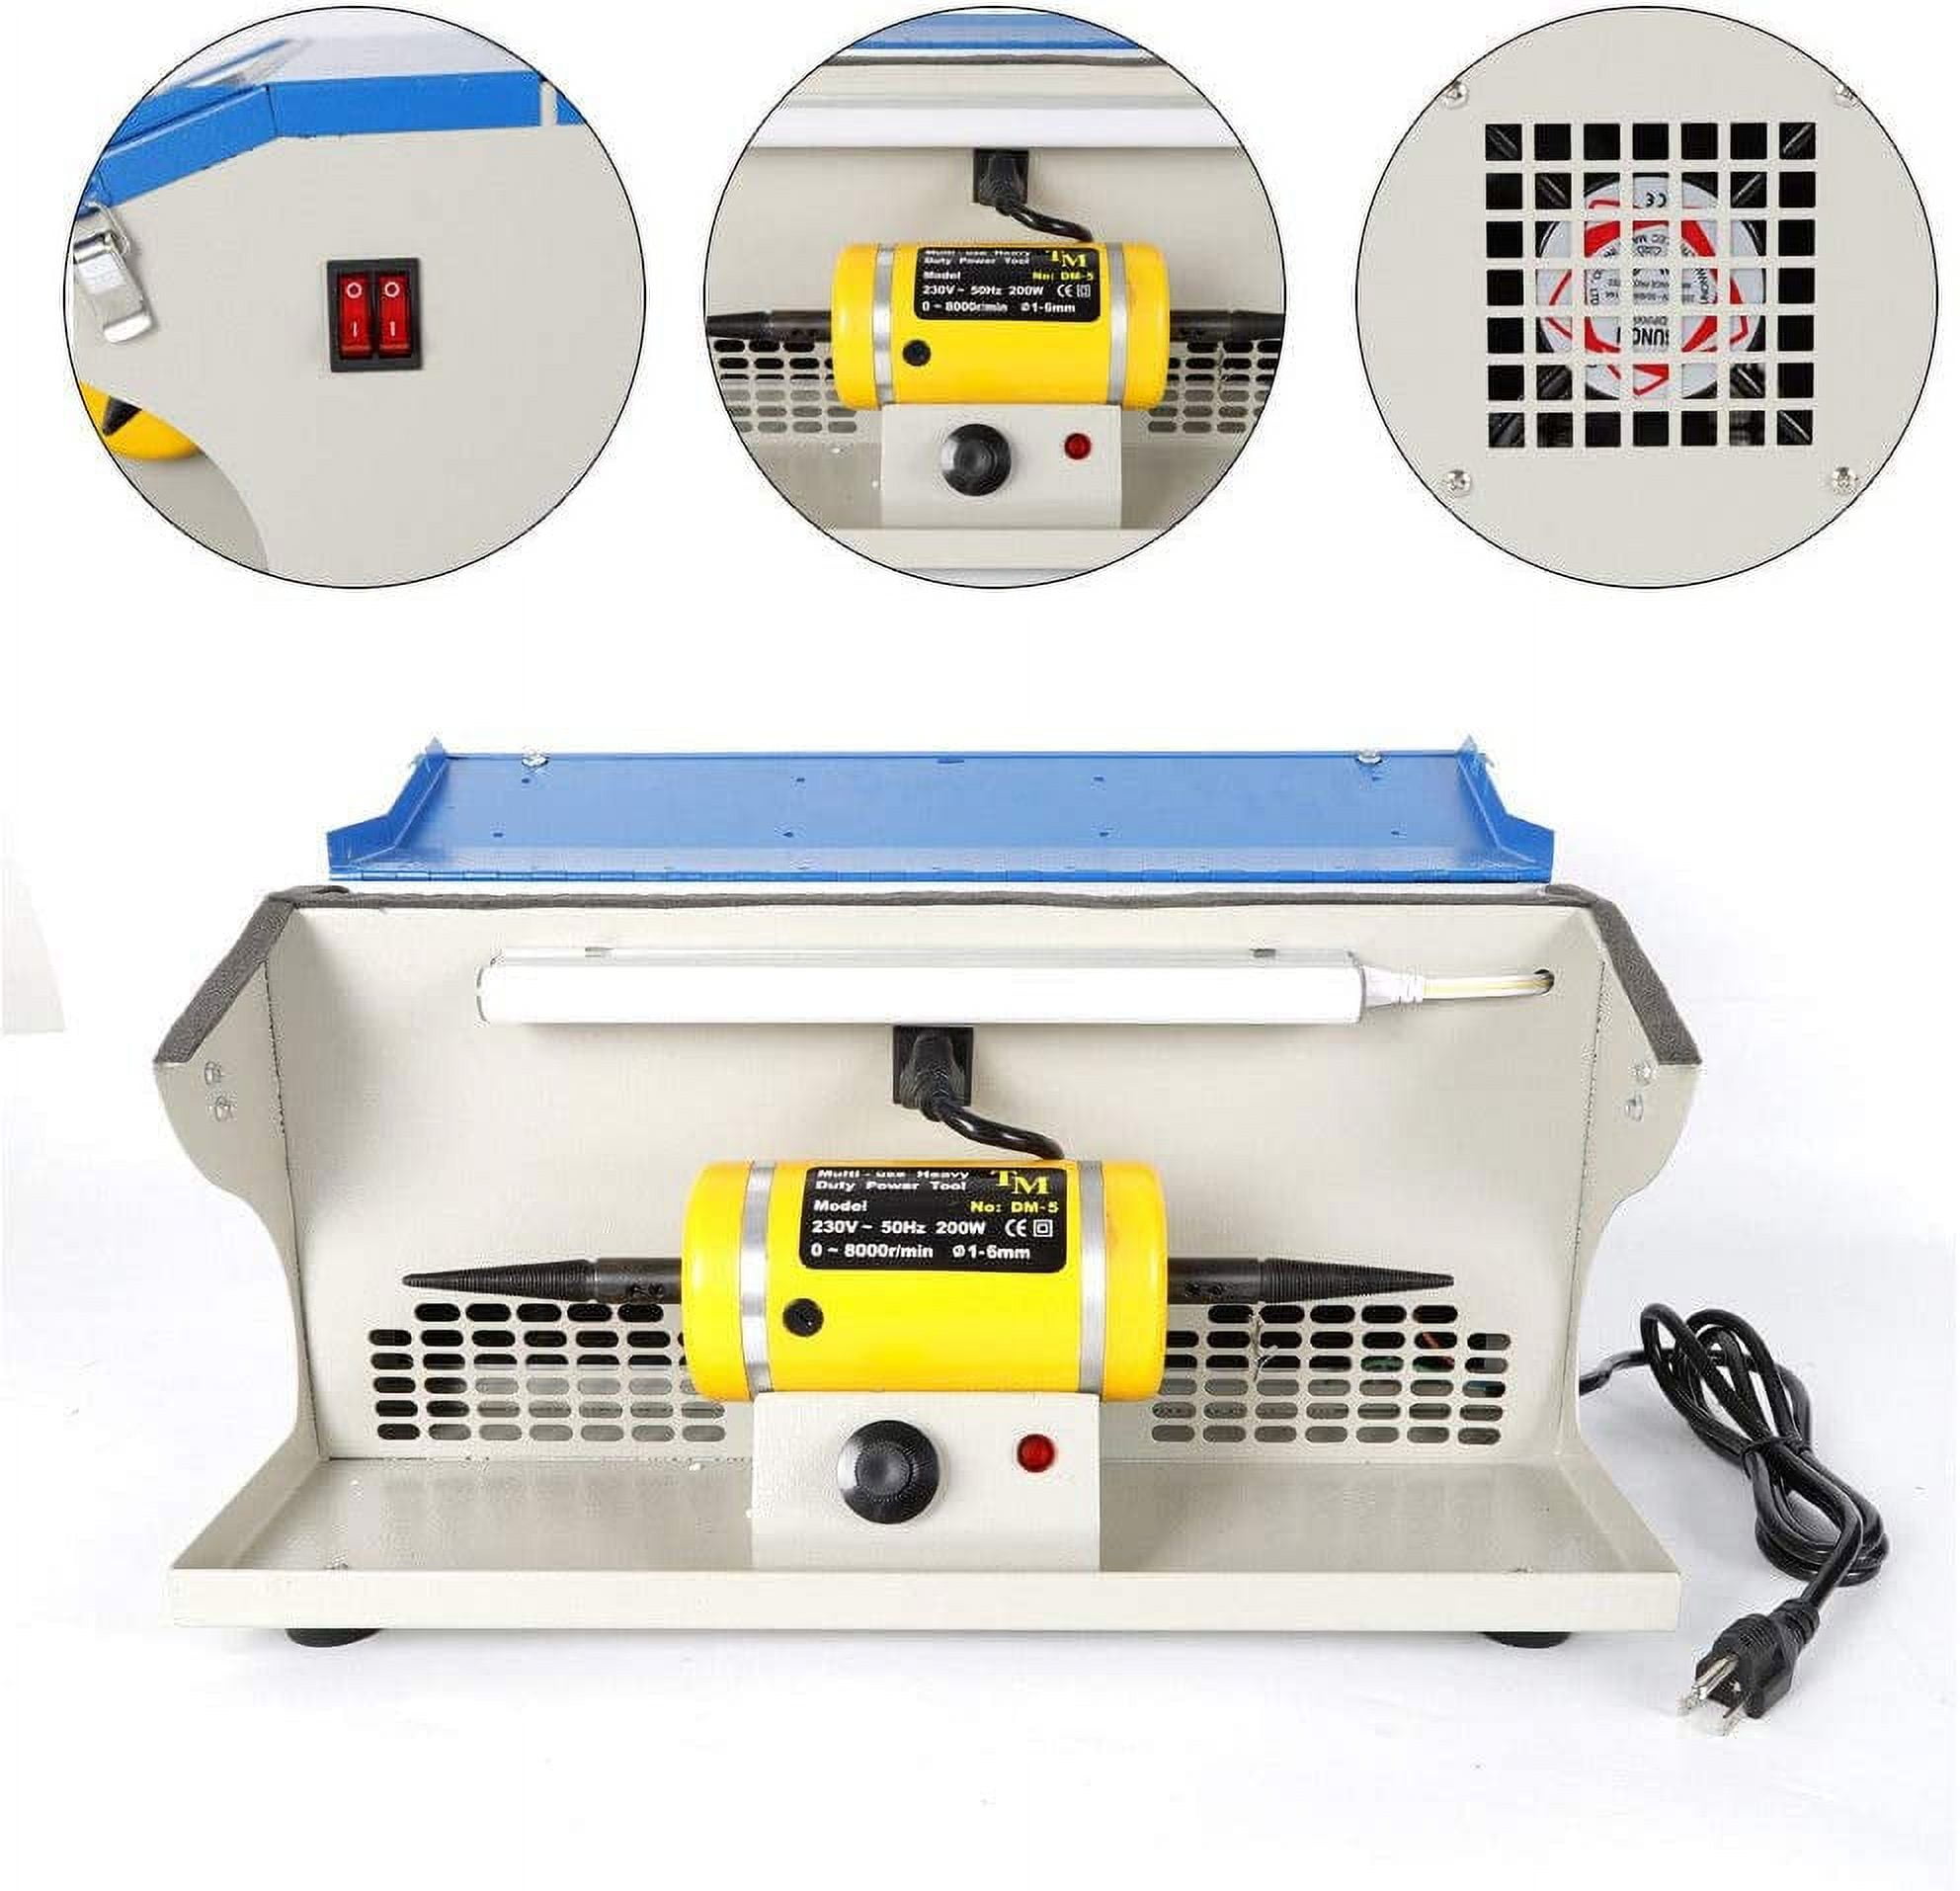  Countertop buffing machine + jewelry polishing machine with 2  polishing wheels - Stable stable performance with low noise and fast  rotation speed (US110V) : Arts, Crafts & Sewing